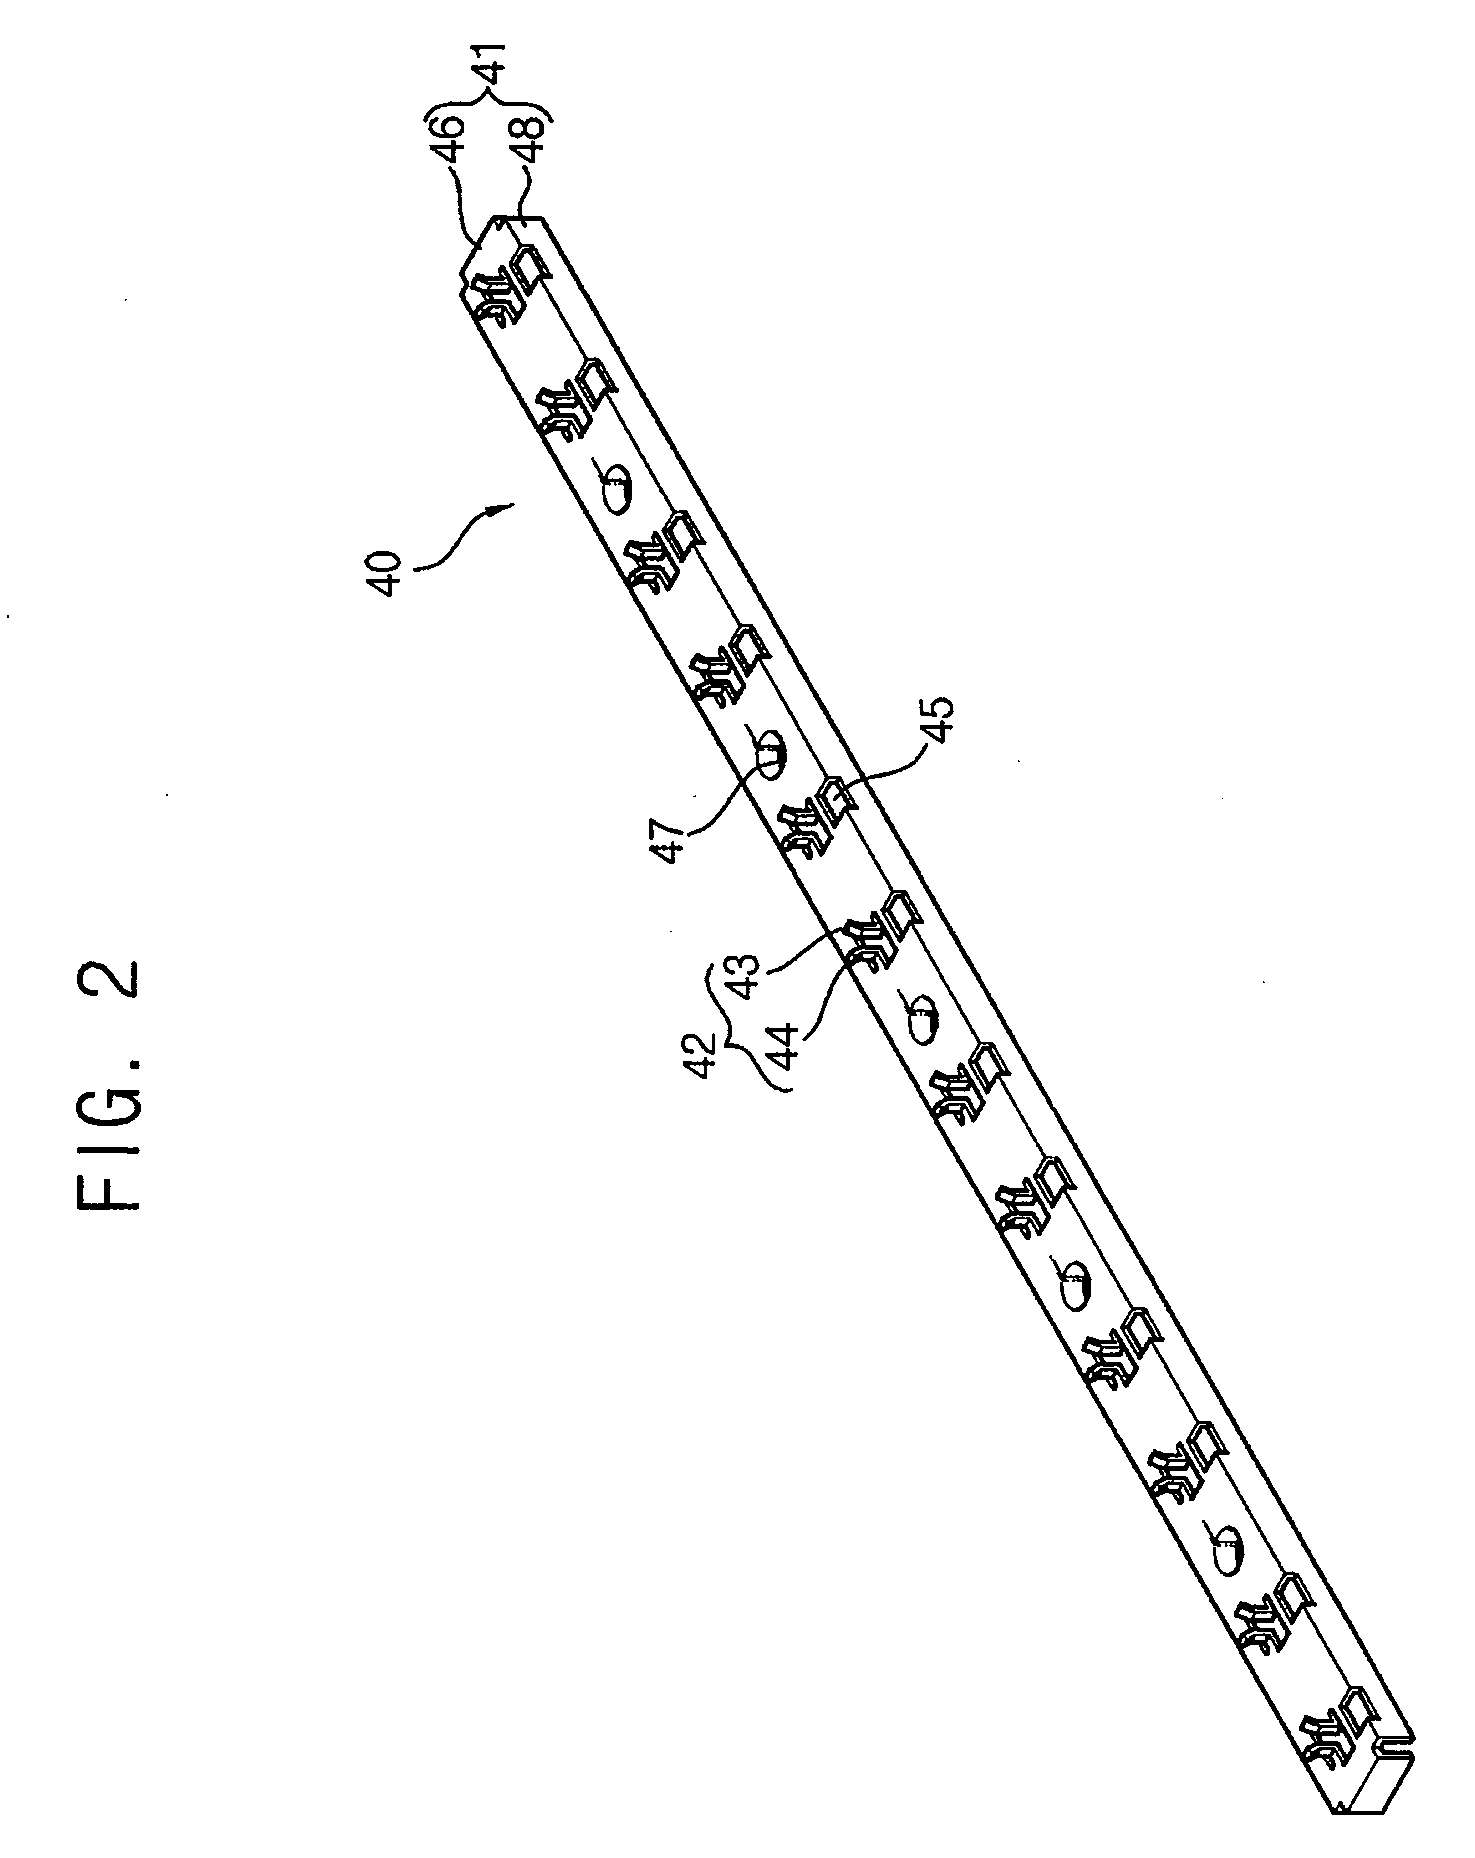 Backlight assembly and method for assembling the same